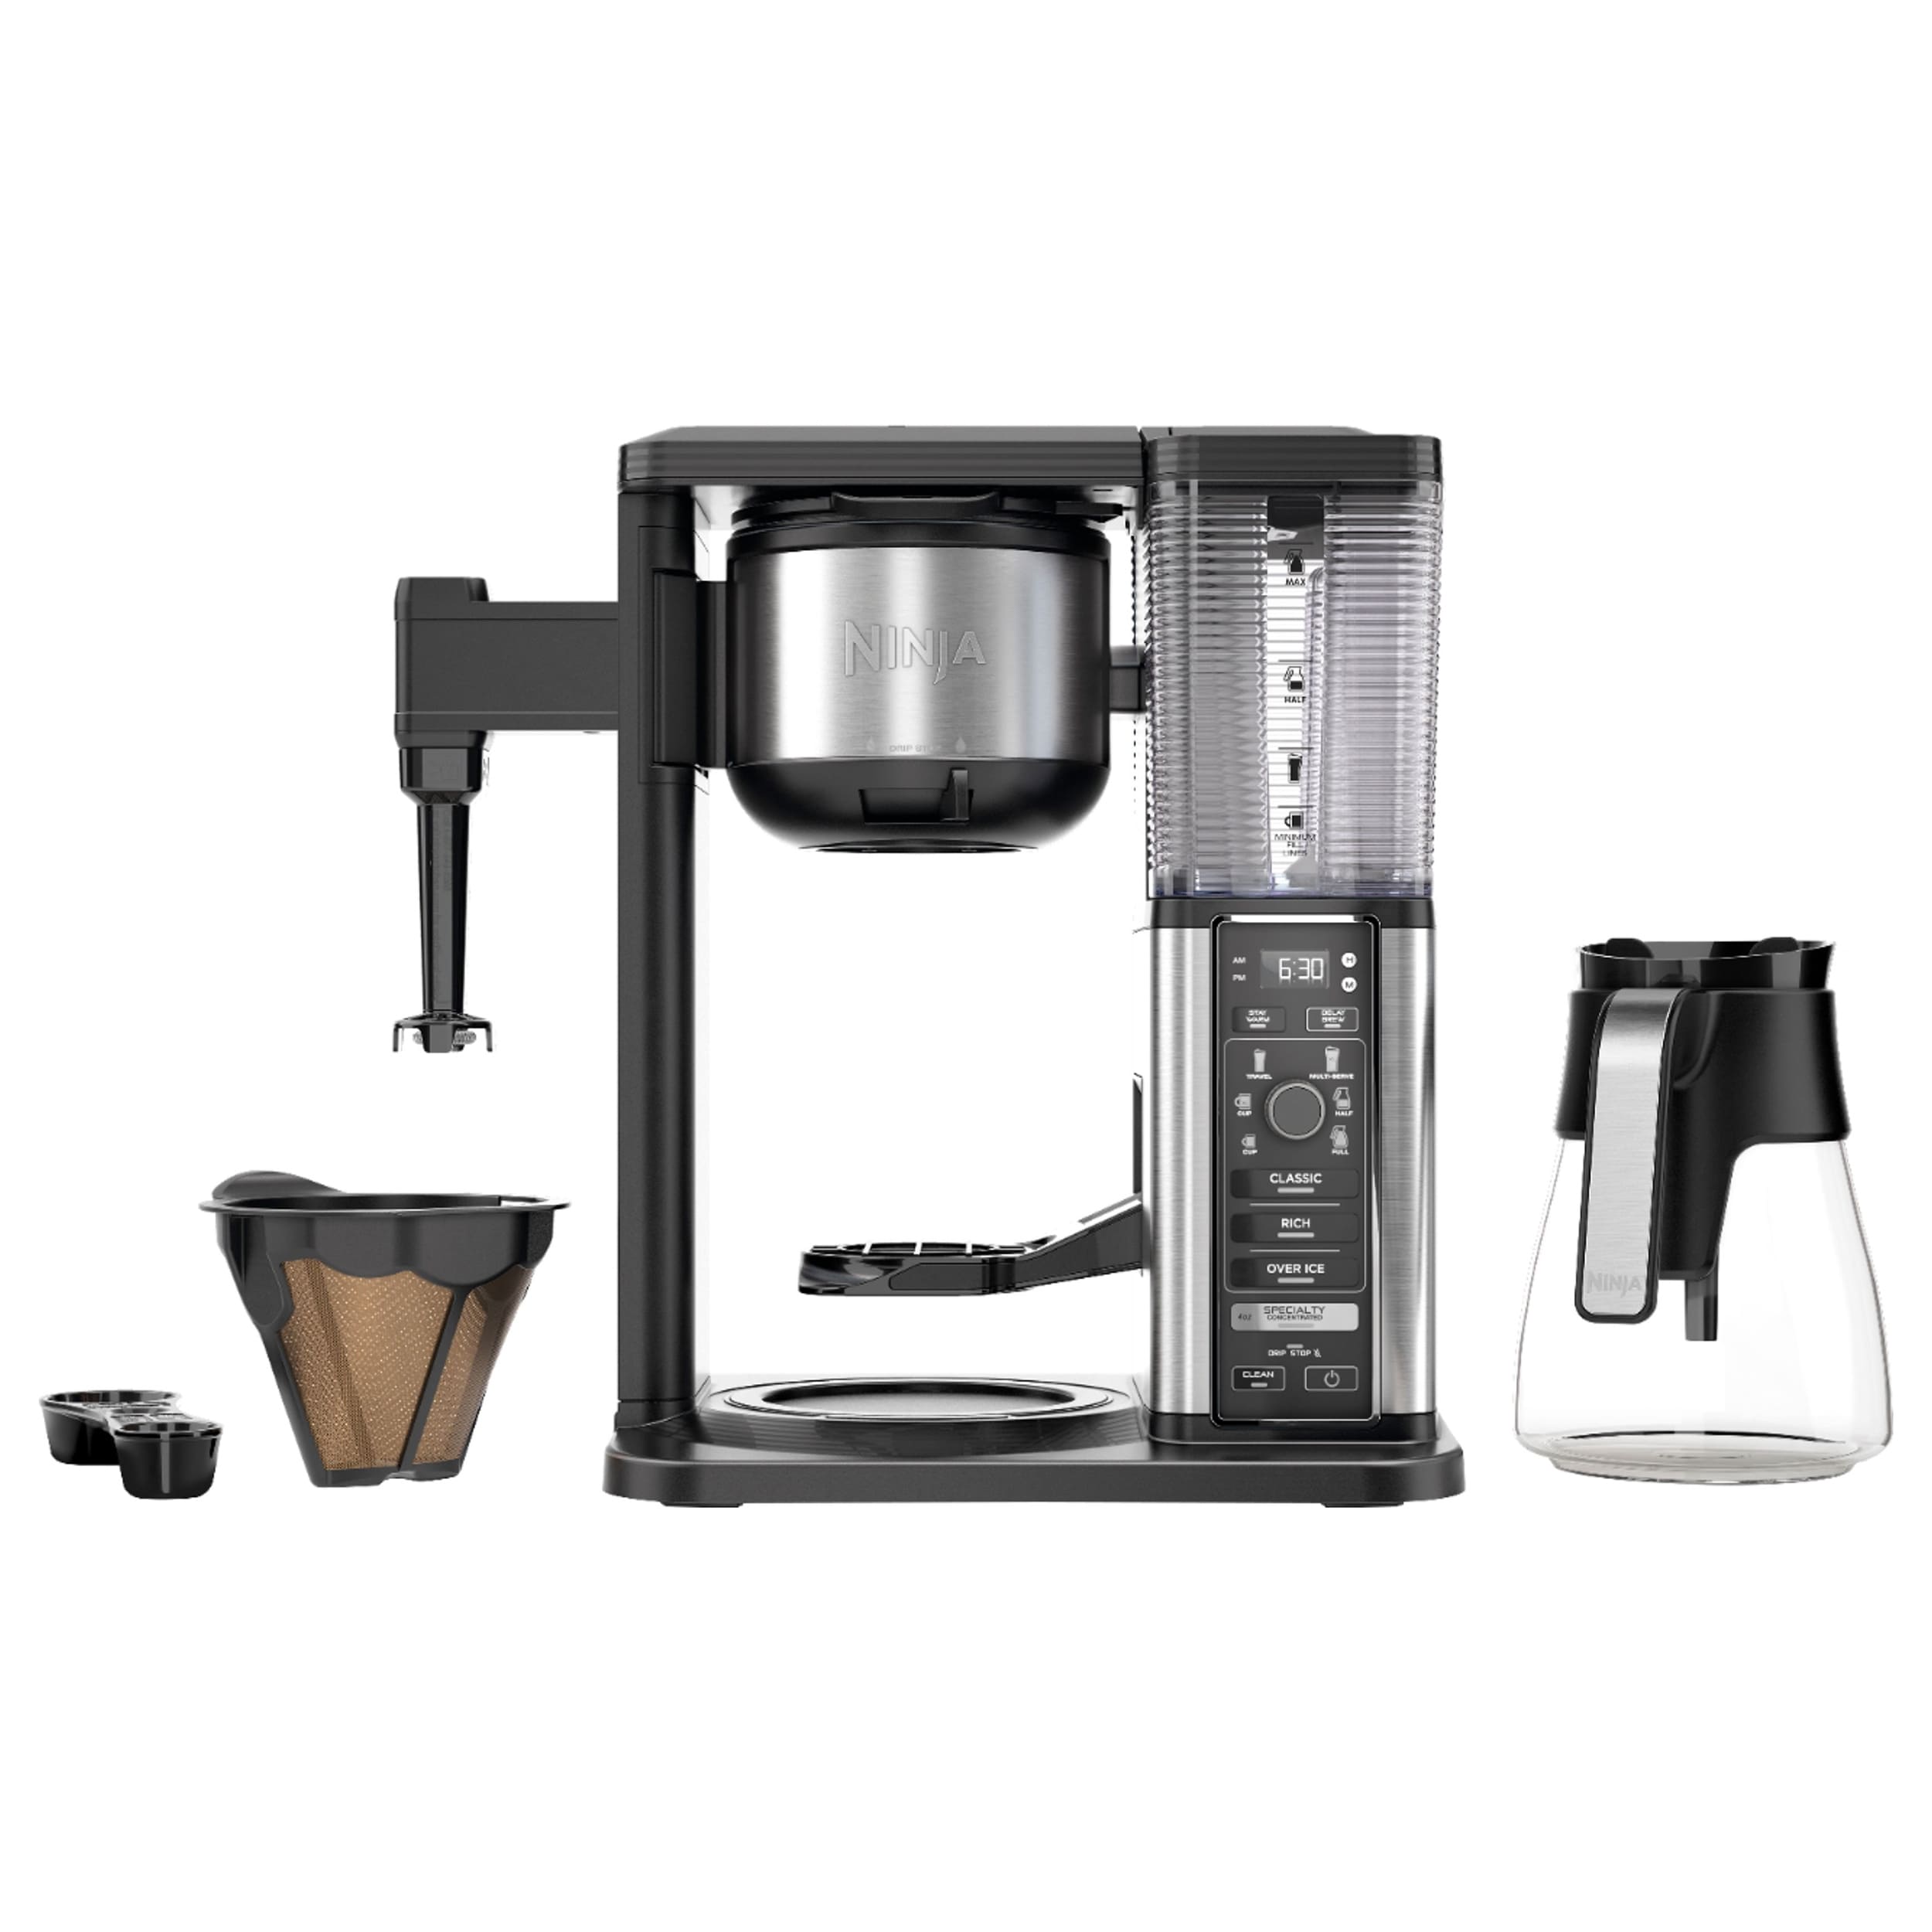 https://ak1.ostkcdn.com/images/products/is/images/direct/4f350de5f181edeb8d8436b2289ae207d60f7307/Ninja-Specialty-Coffee-Maker-with-Glass-Garage.jpg